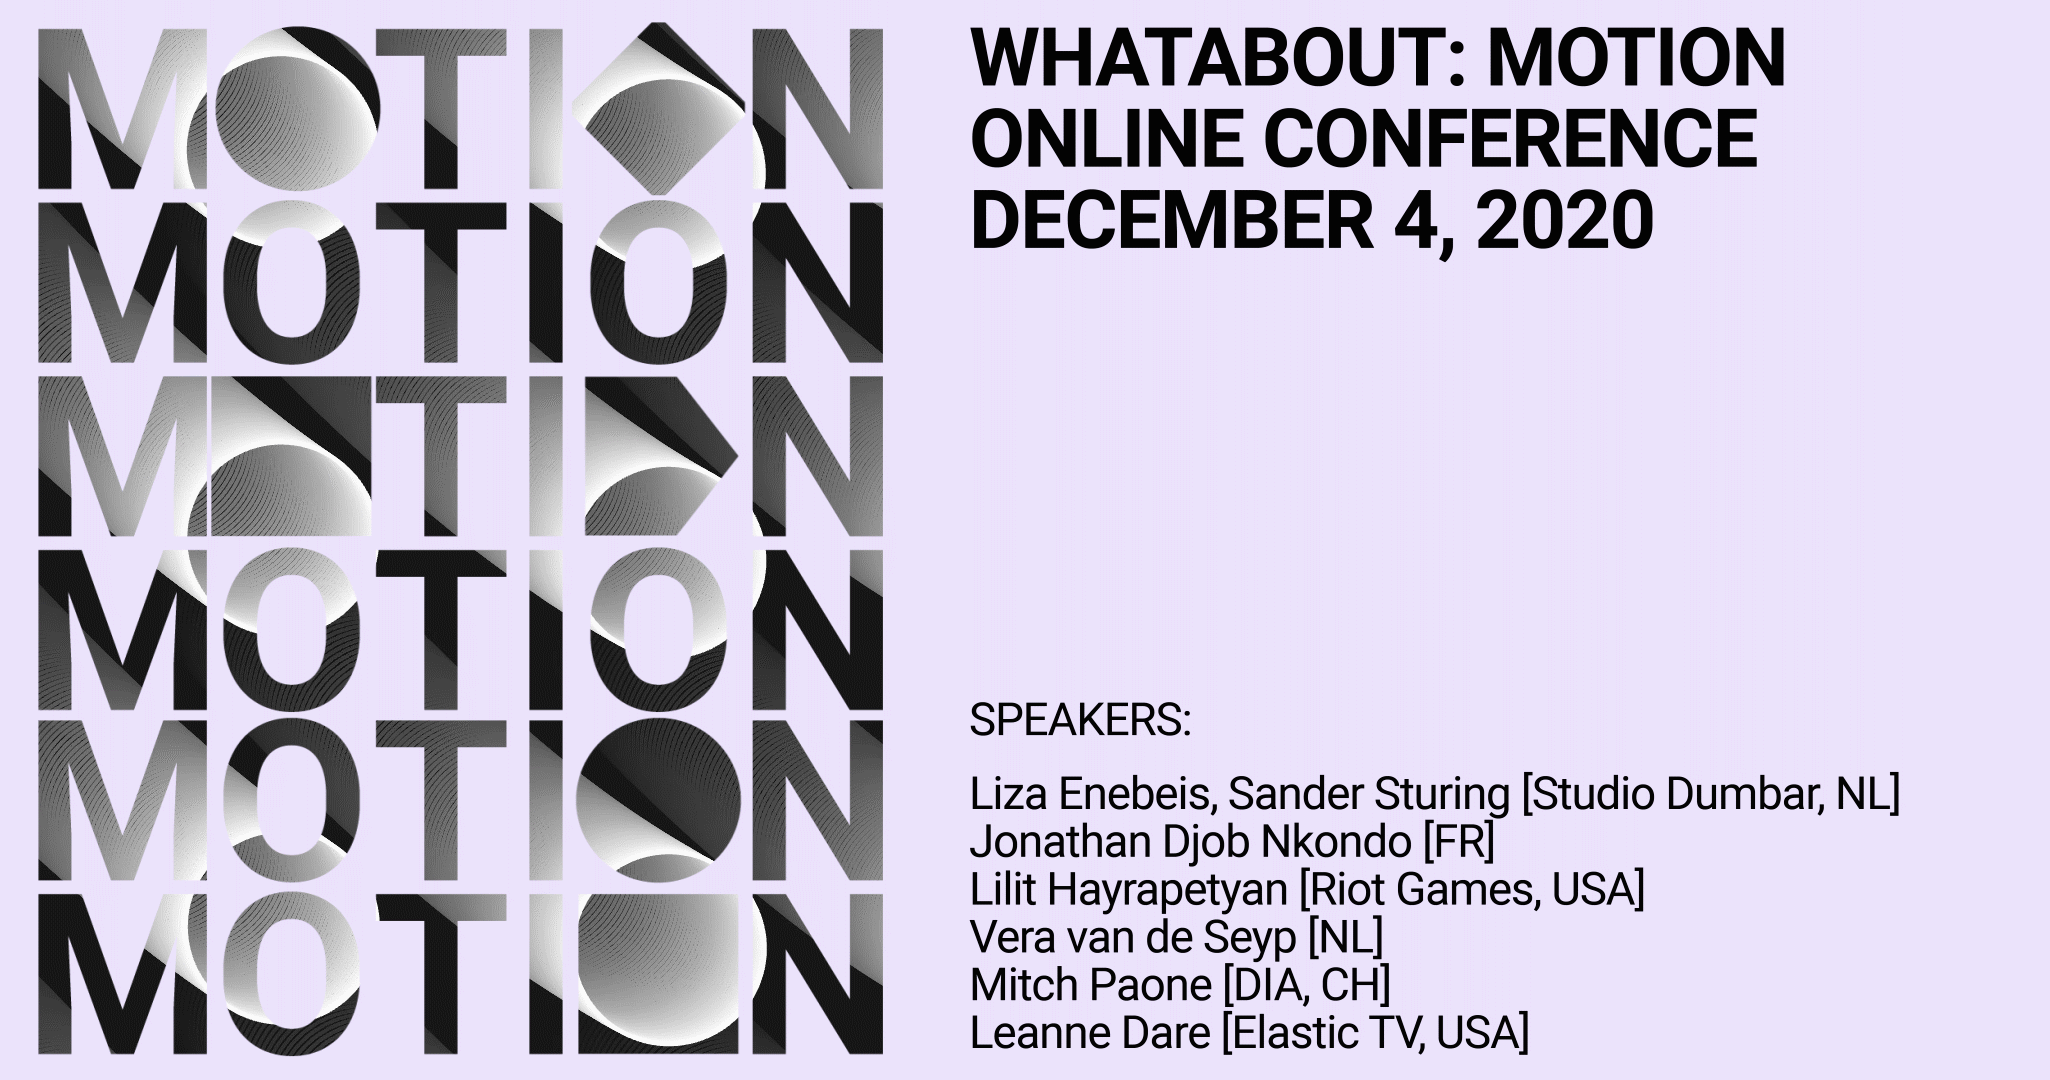 Whatabout: motion design conference. Online.